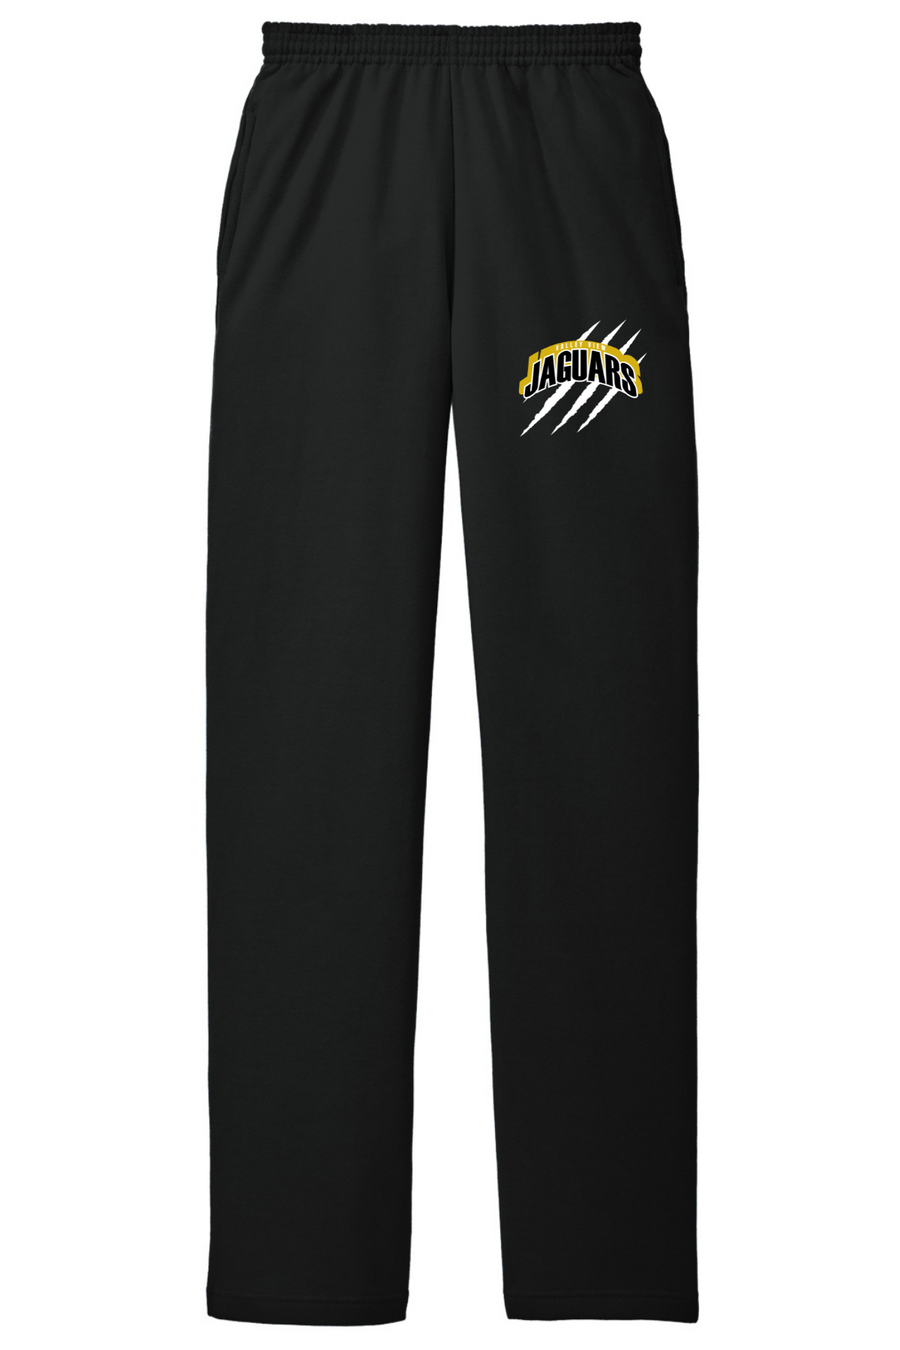 Valley View Middle School On-Demand-Unisex Sweatpants Claw